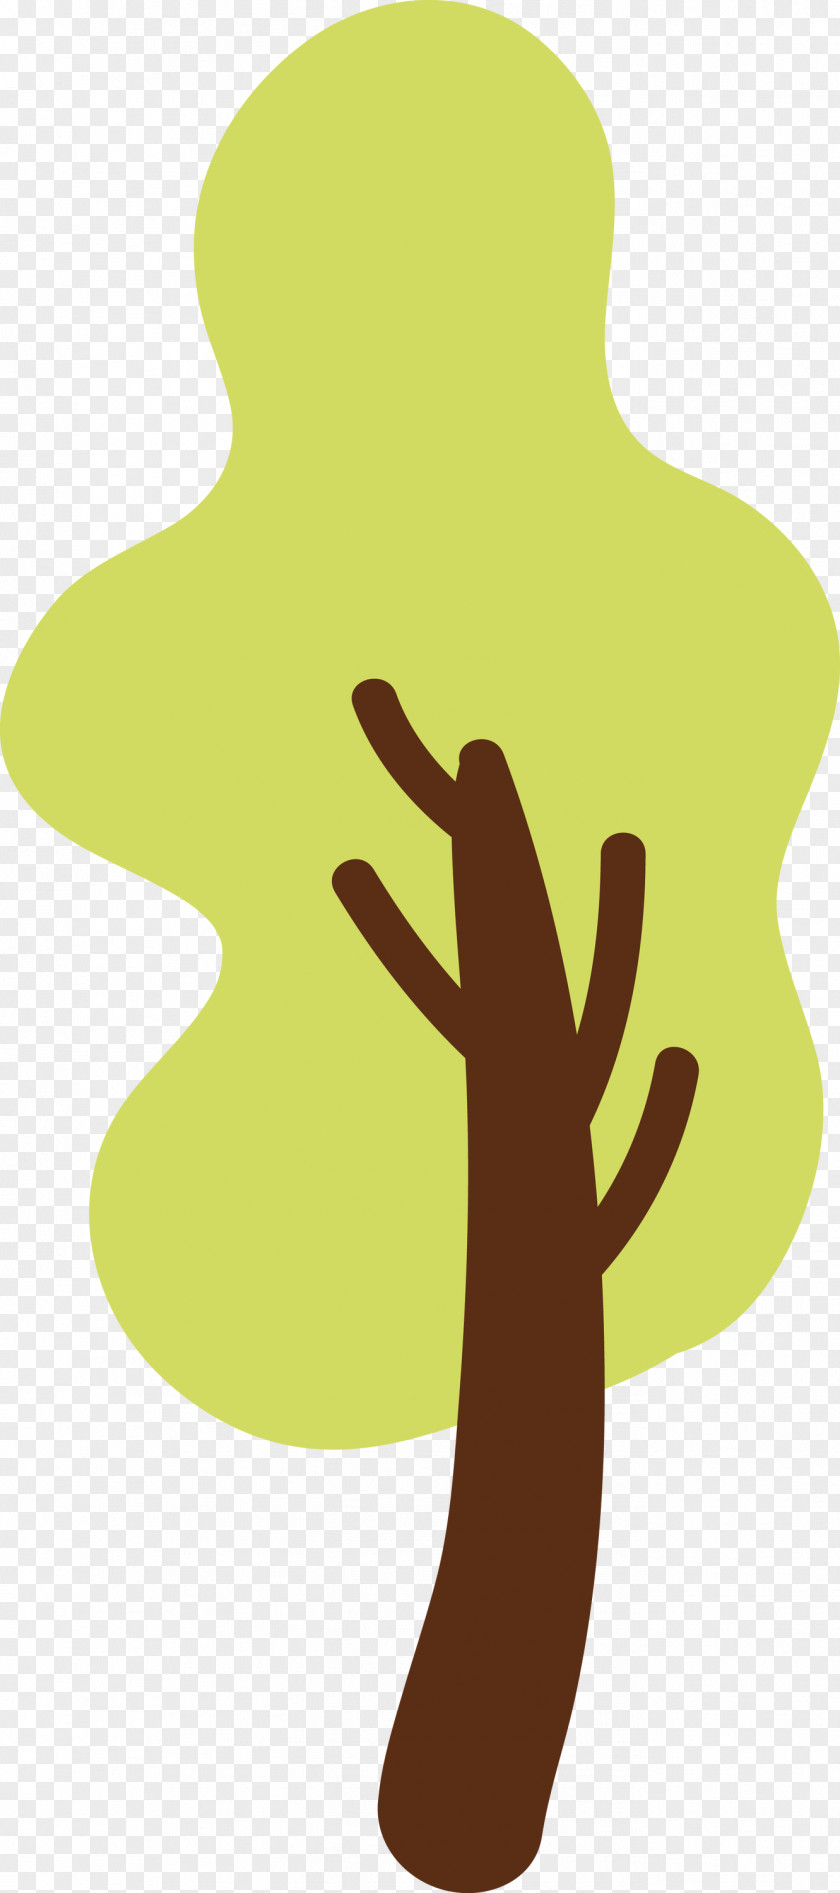 Green Hand Finger Gesture Thumb PNG